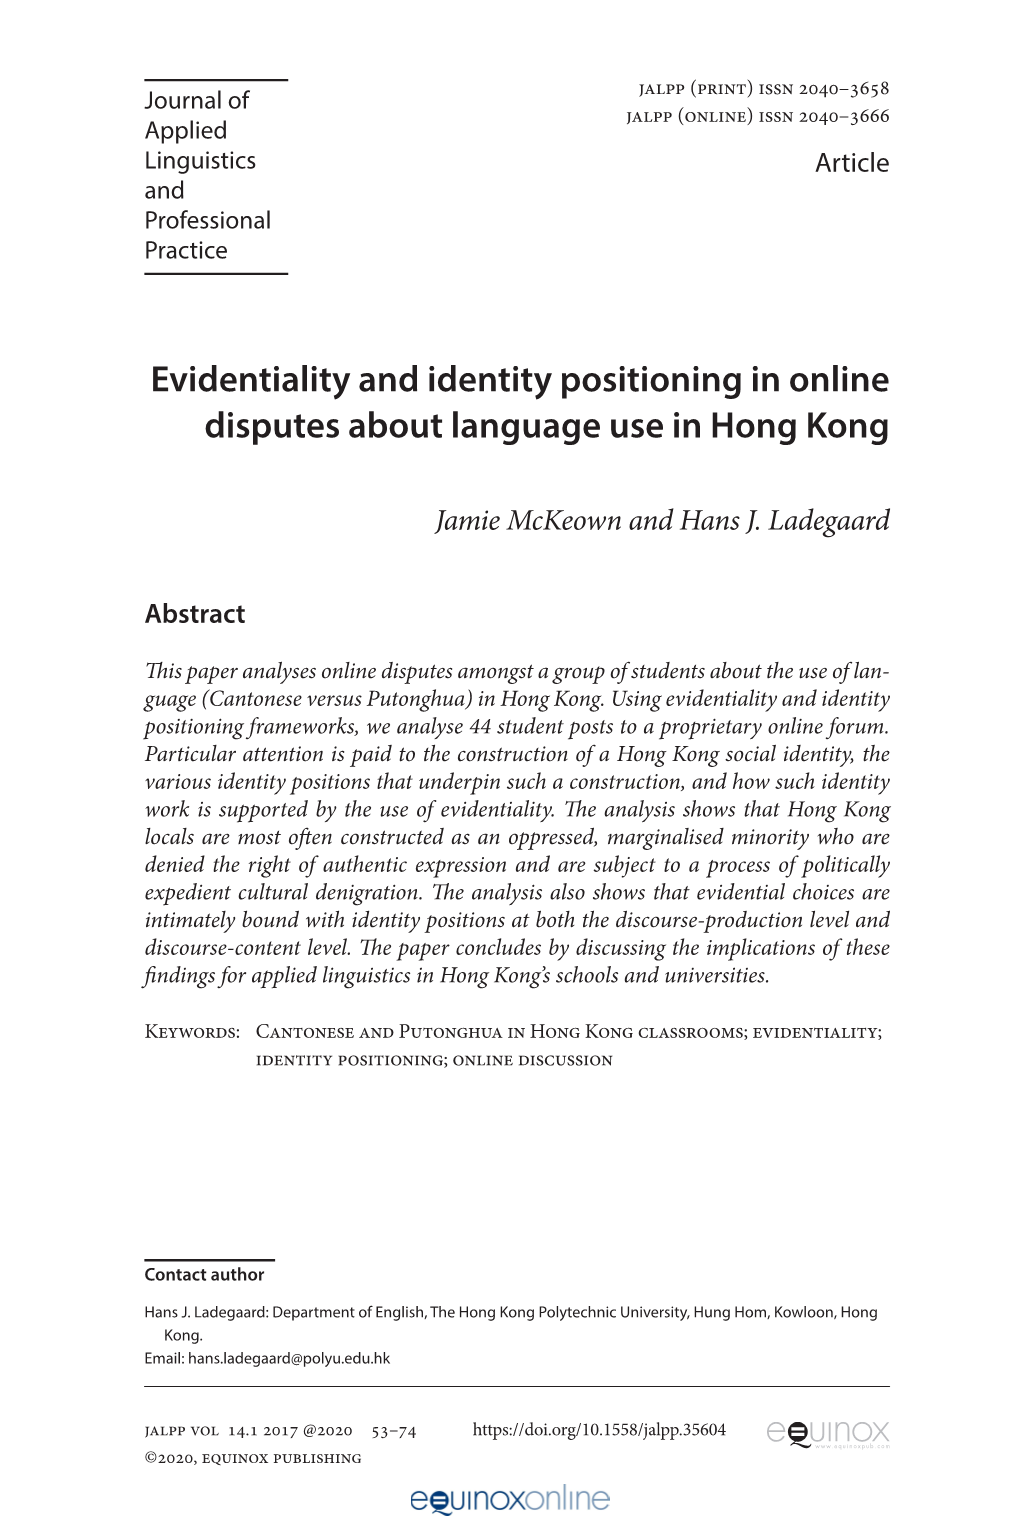 Evidentiality and Identity Positioning in Online Disputes About Language Use in Hong Kong